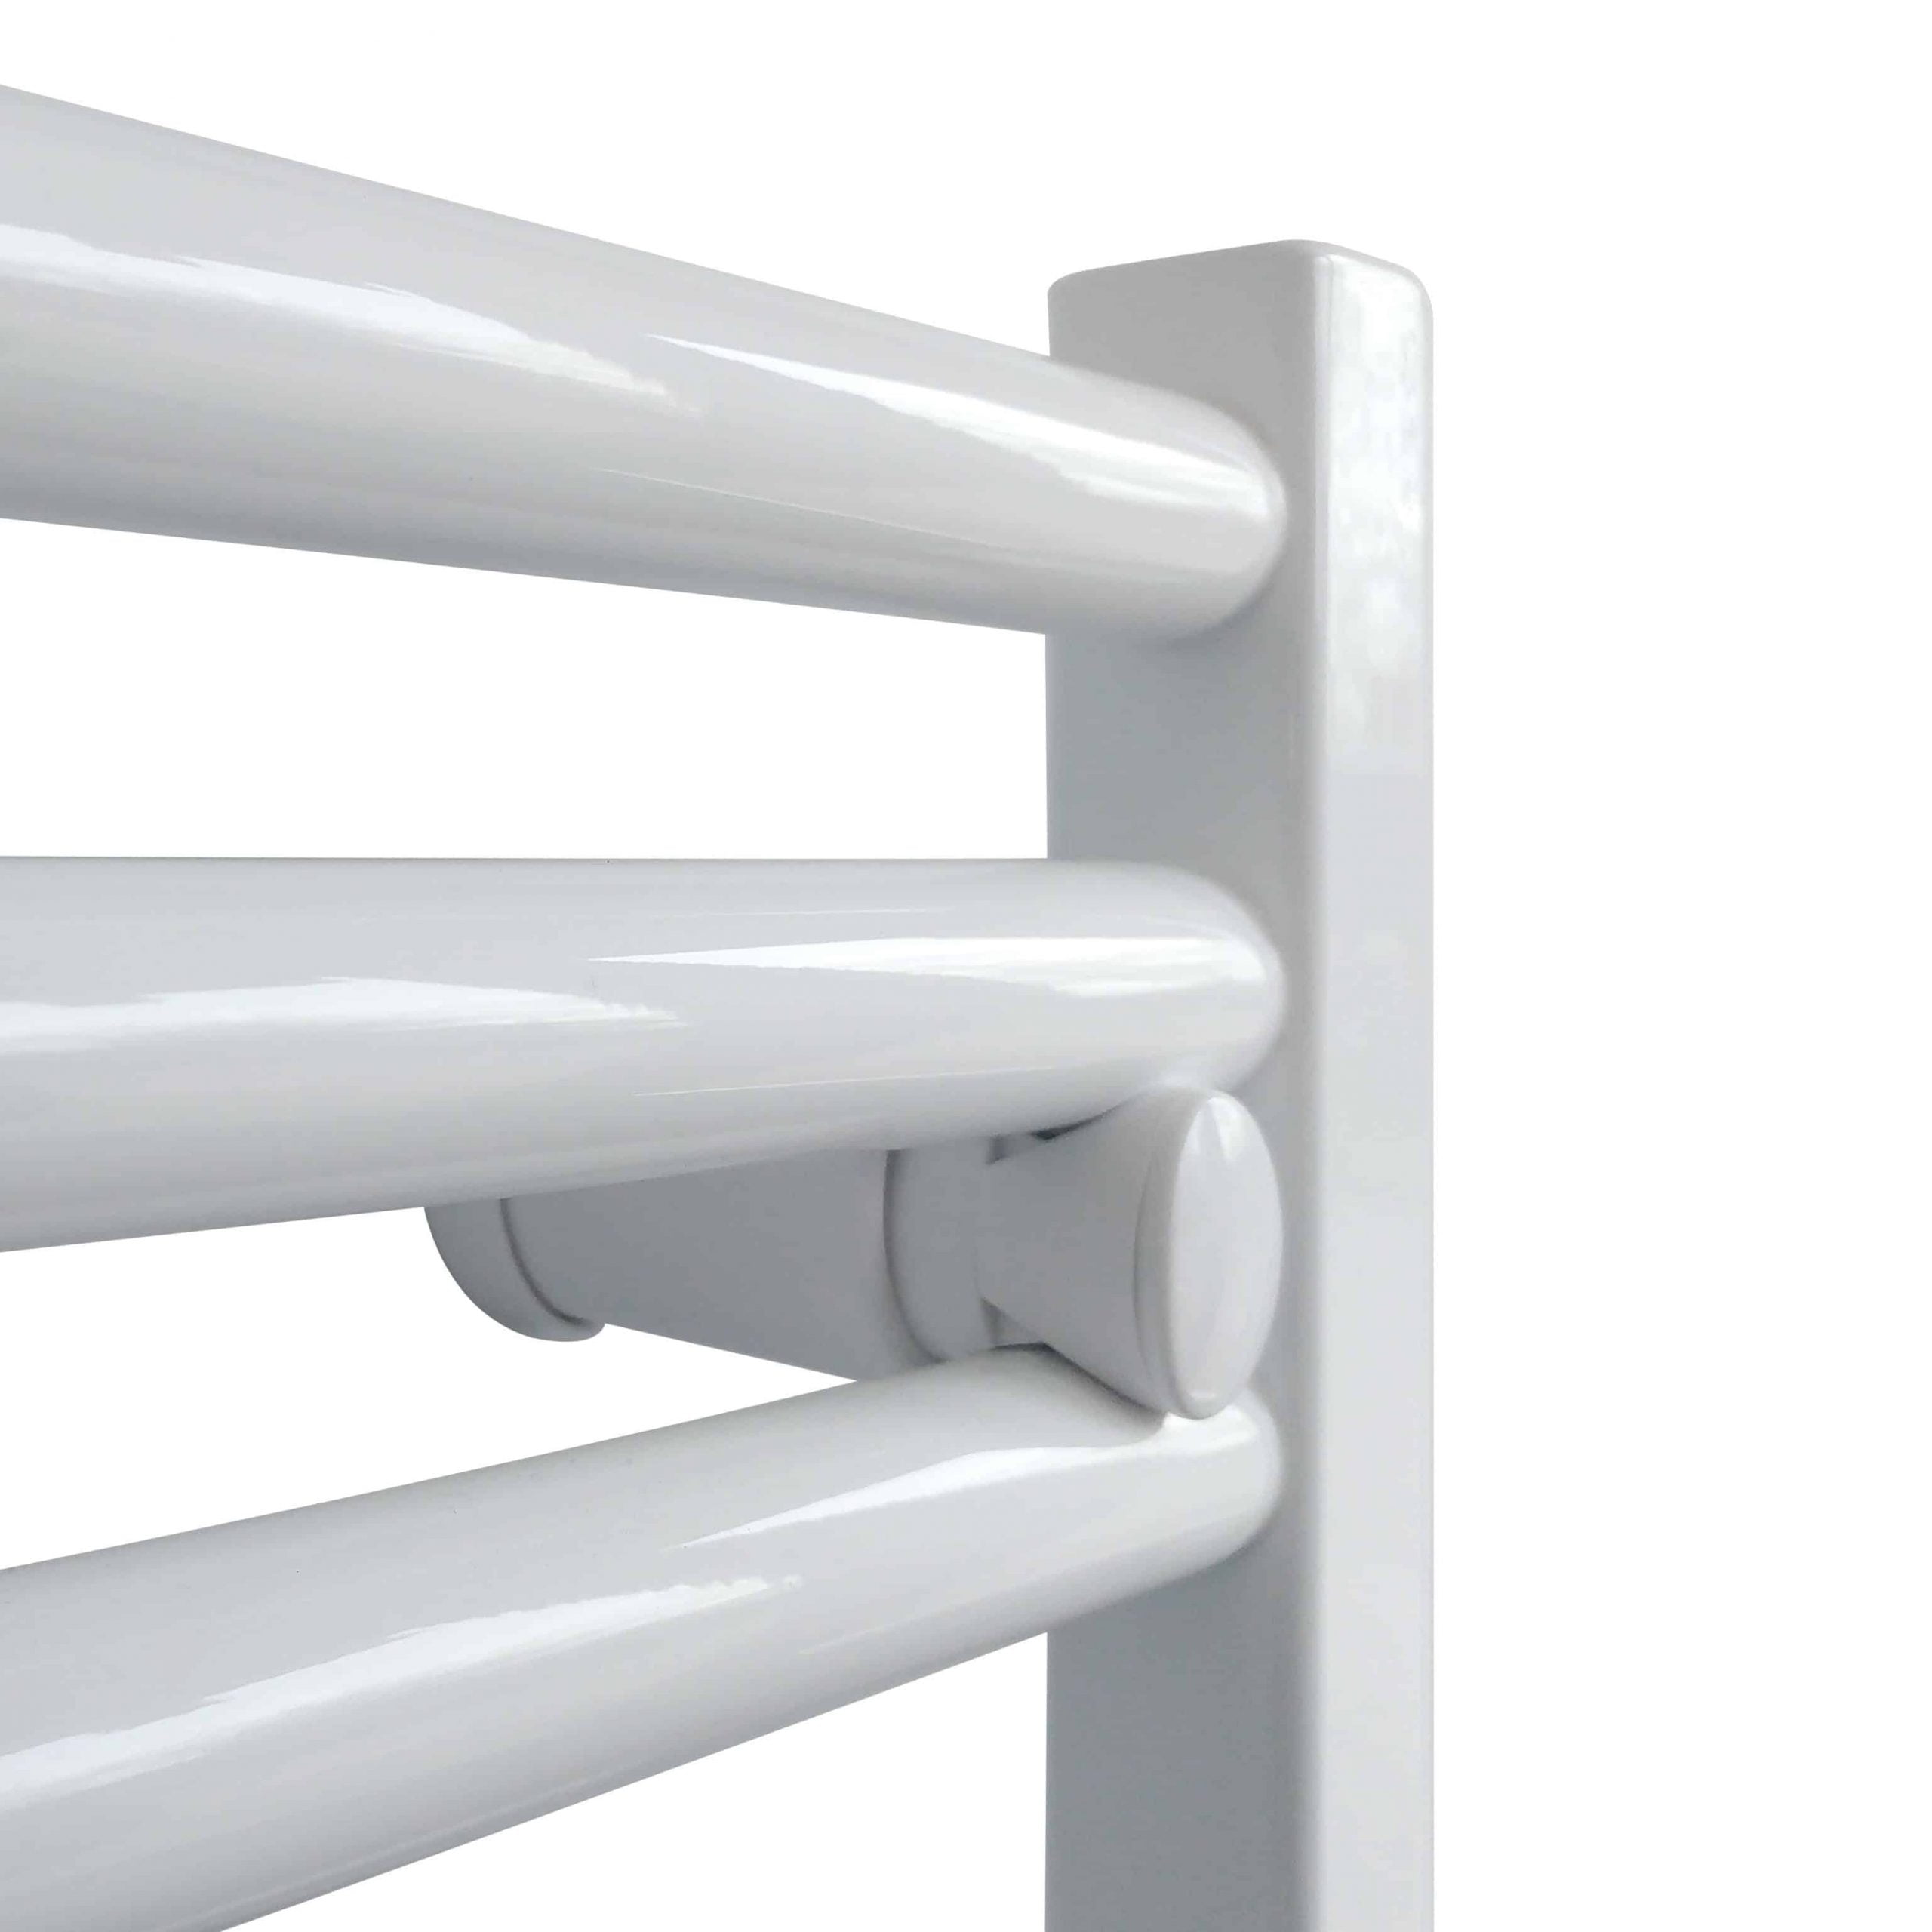 Aura 25 Curved White | Dual Fuel Towel Rail with Thermostat, Timer + WiFi Control Efficient Heating, Well Made, Excellent Value Buy Online From Solaire Quartz UK Shop 9